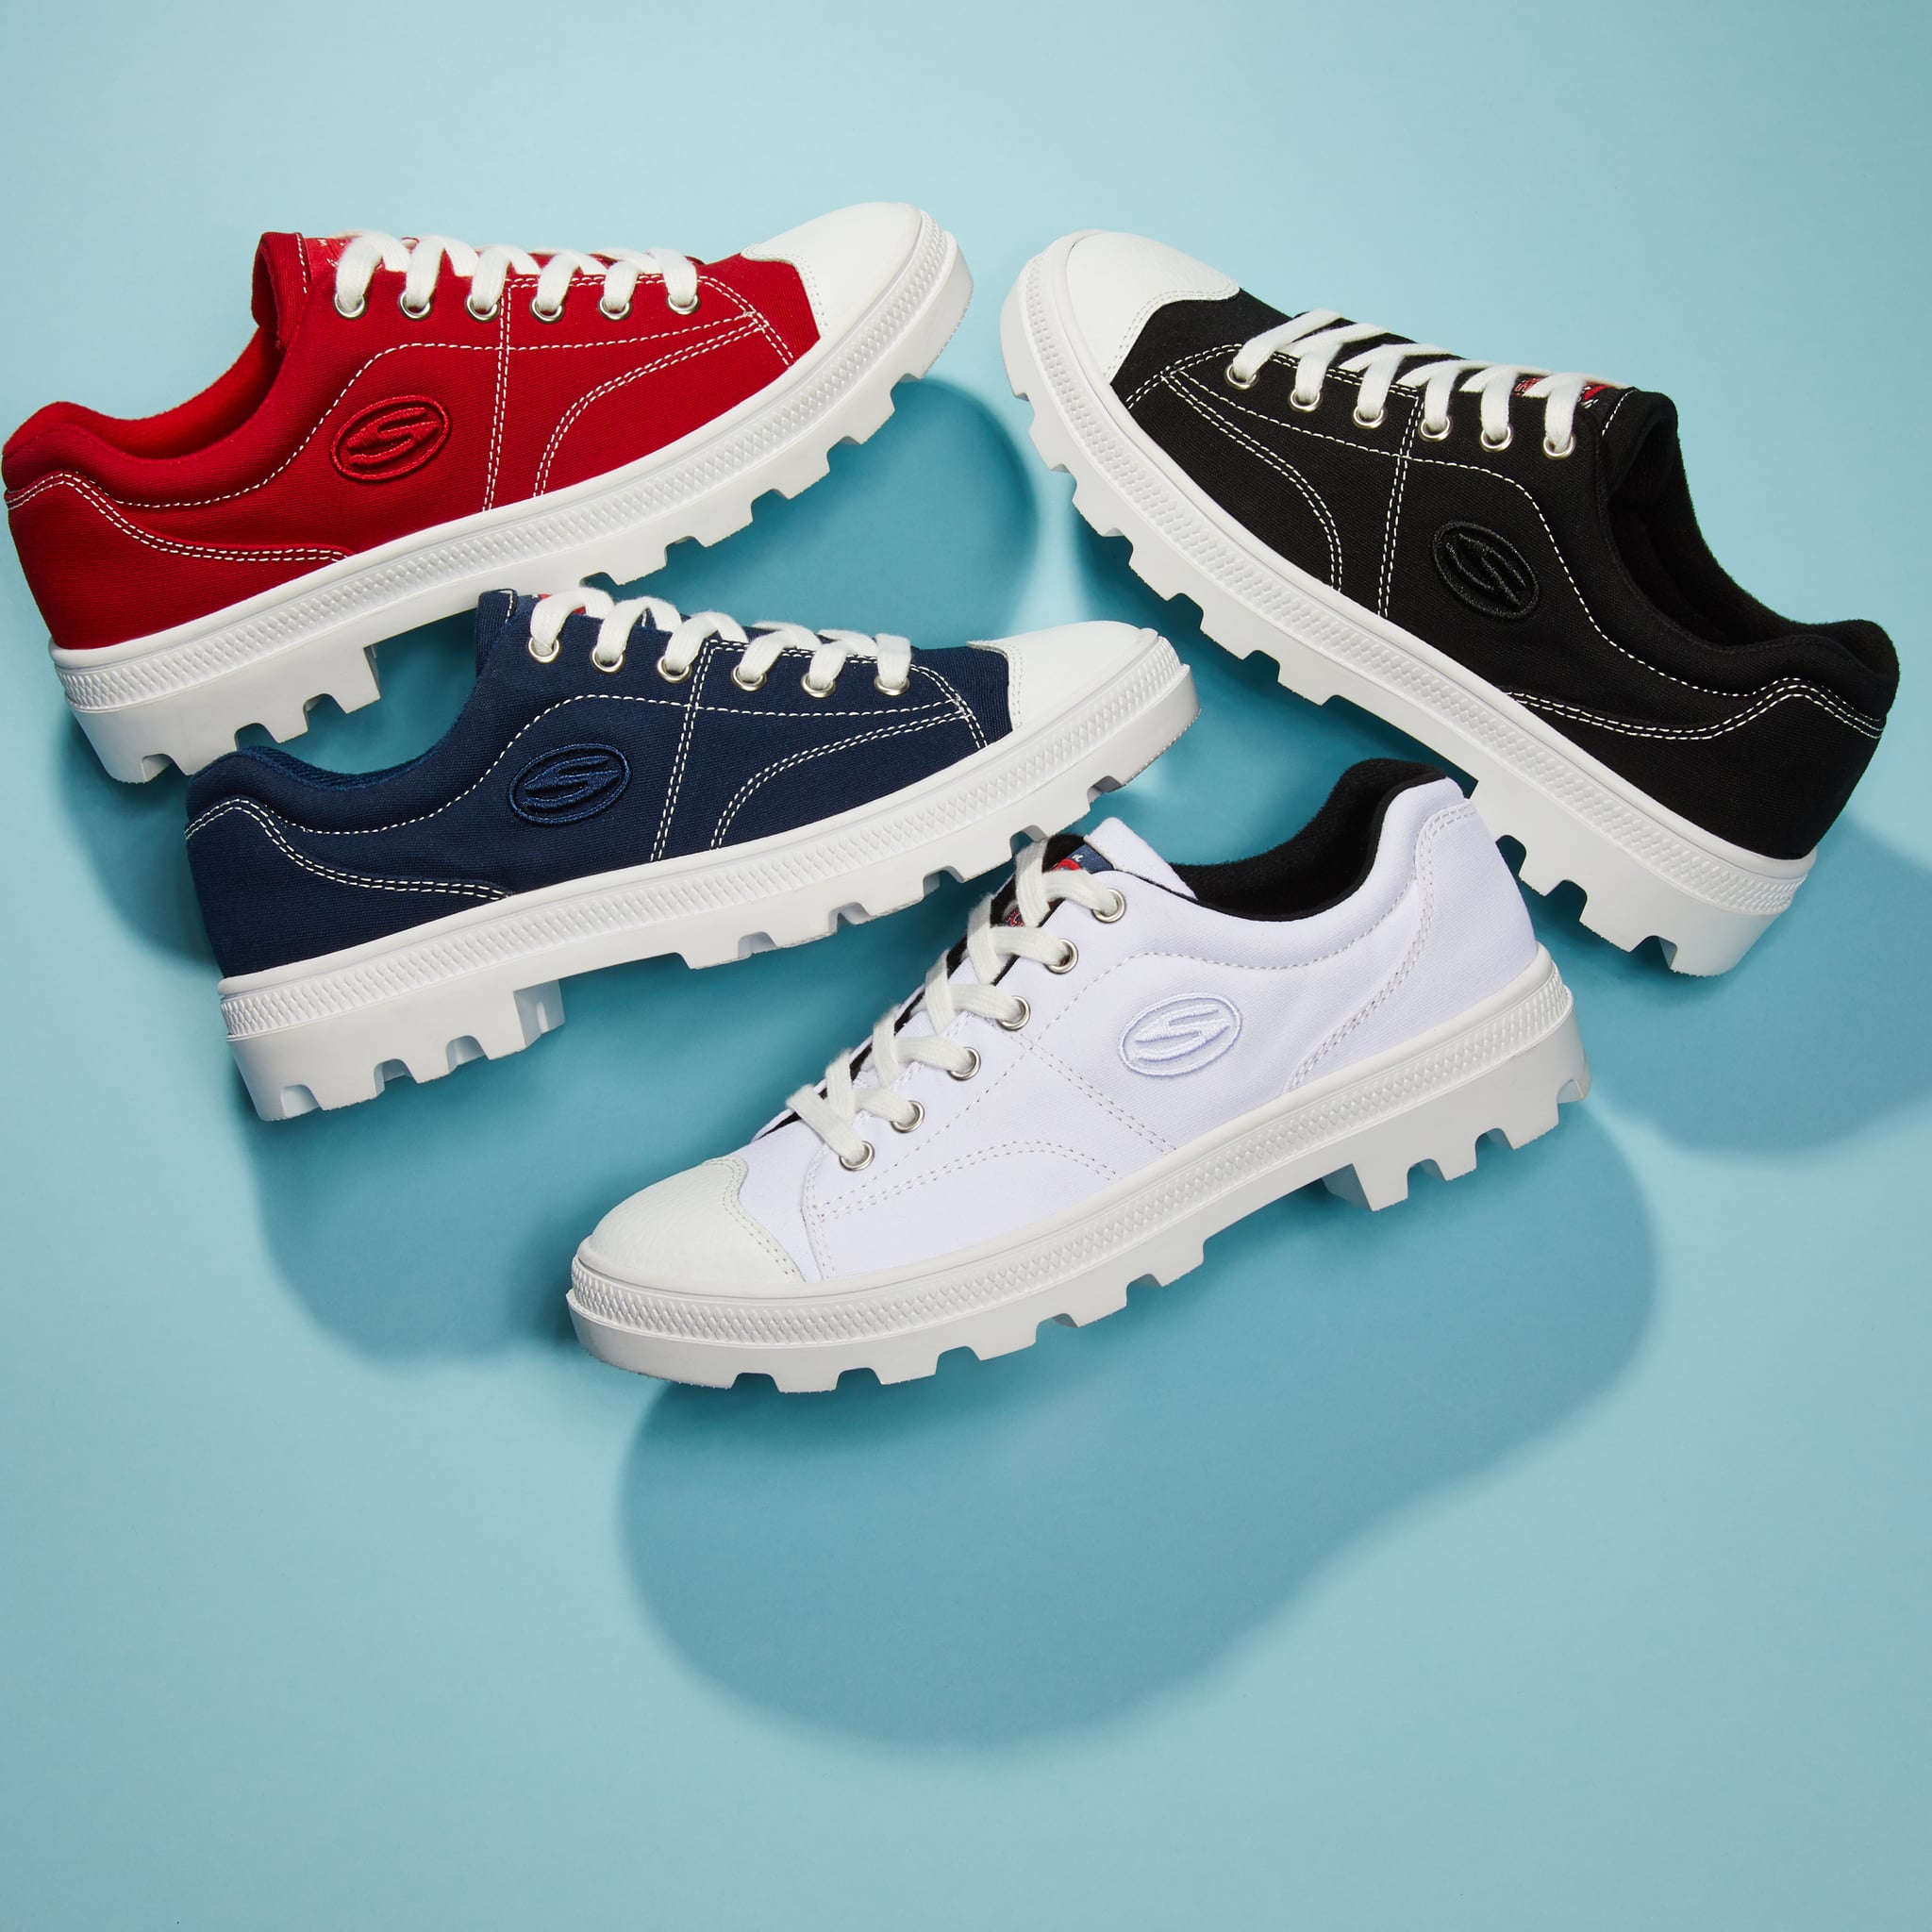 Skechers Sneakers Heritage Collection 